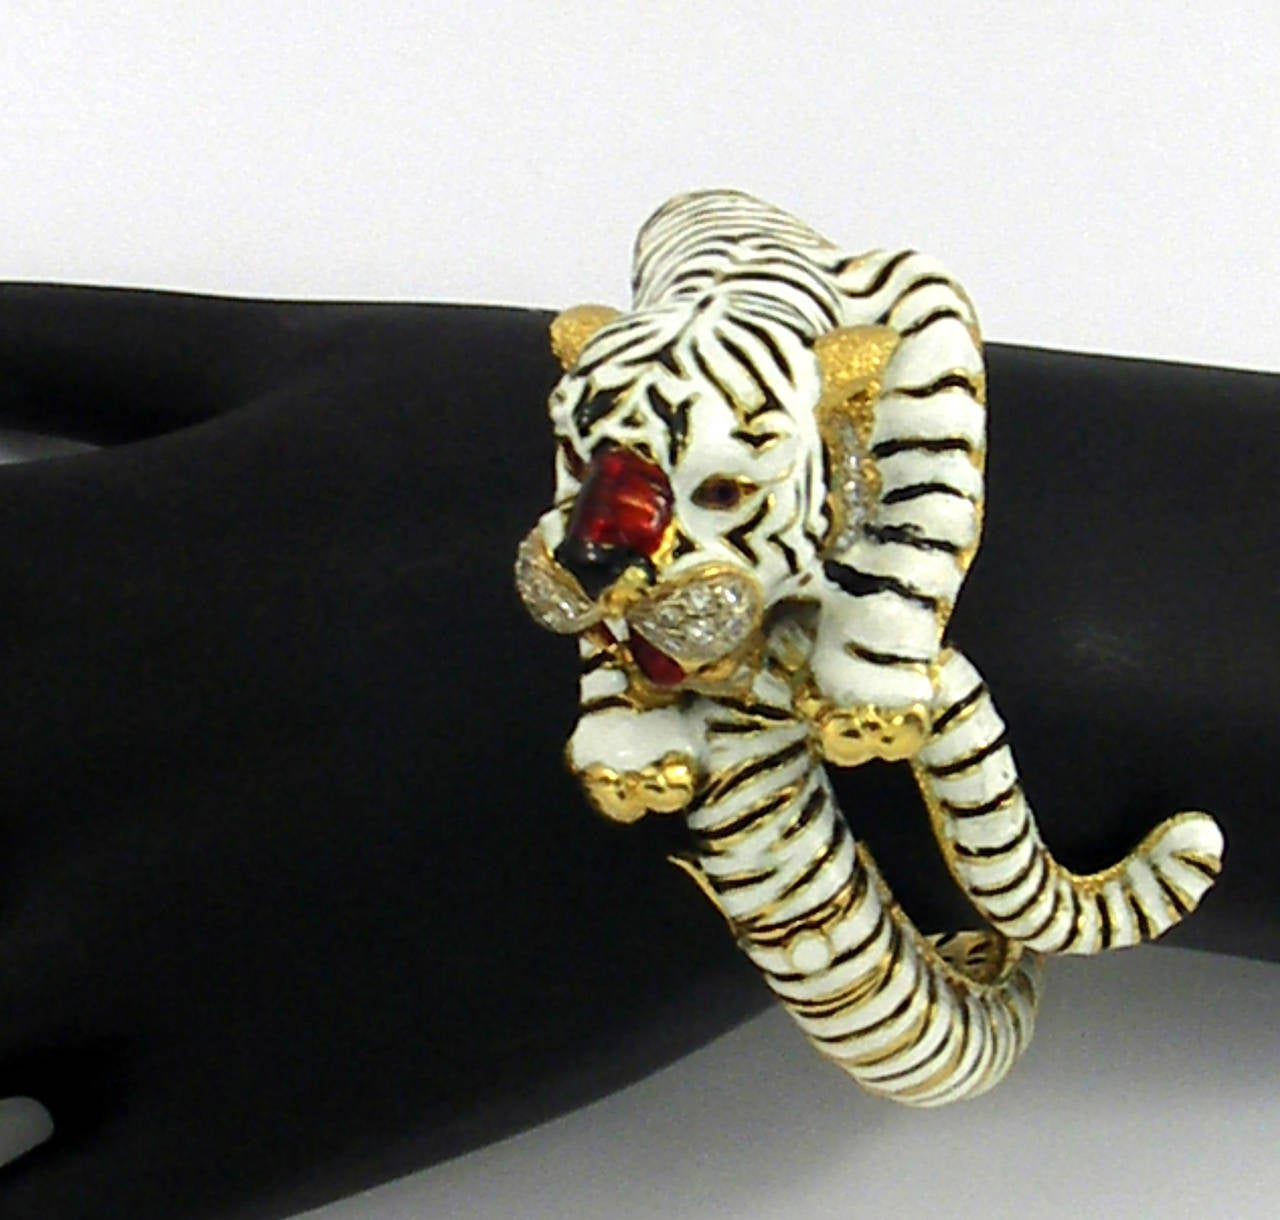 18K yellow gold bangle bracelet featuring a tiger design with black and white enamel stripes, diamond face, and ruby eyes. With a 6 3/4 inch circumference, this animated bracelet will fit a medium wrist.